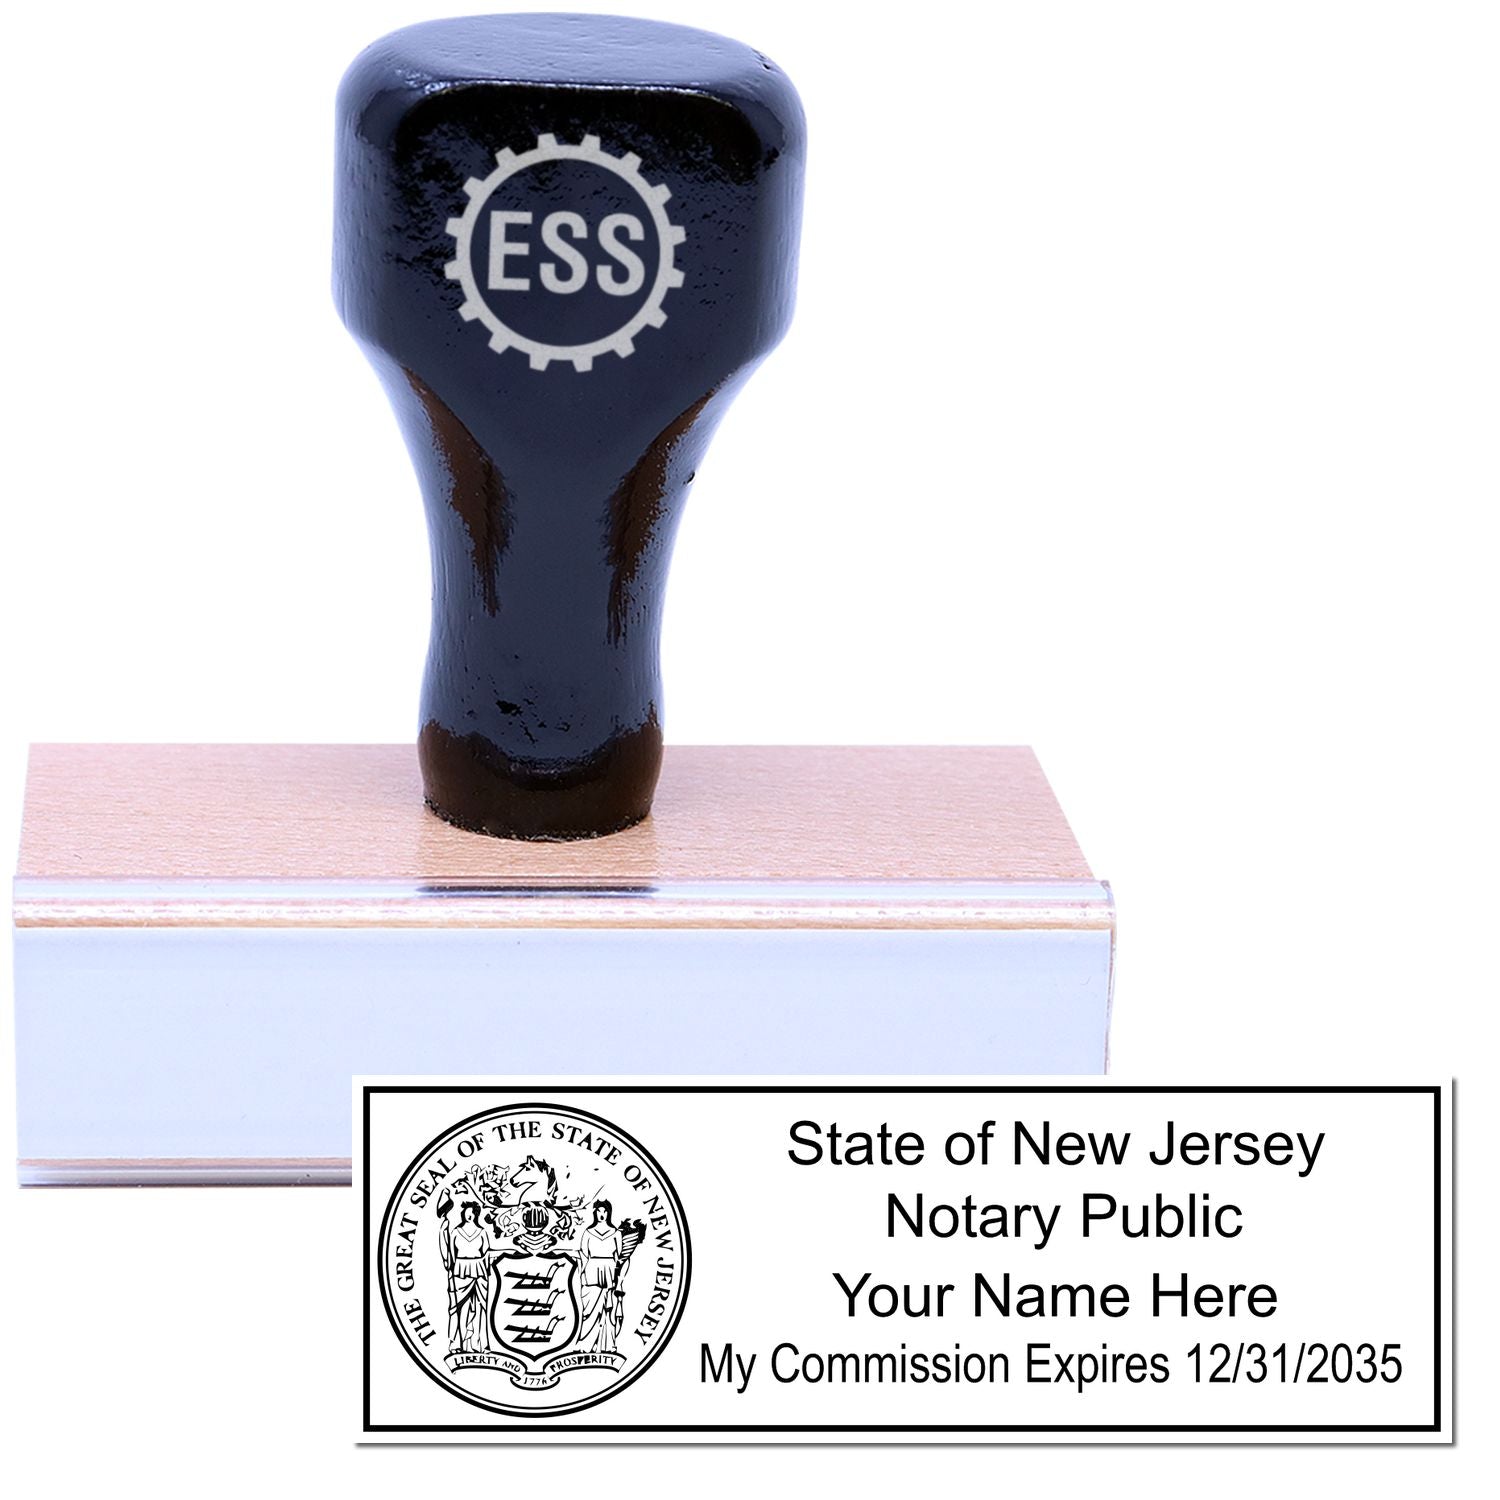 The main image for the Wooden Handle New Jersey State Seal Notary Public Stamp depicting a sample of the imprint and electronic files